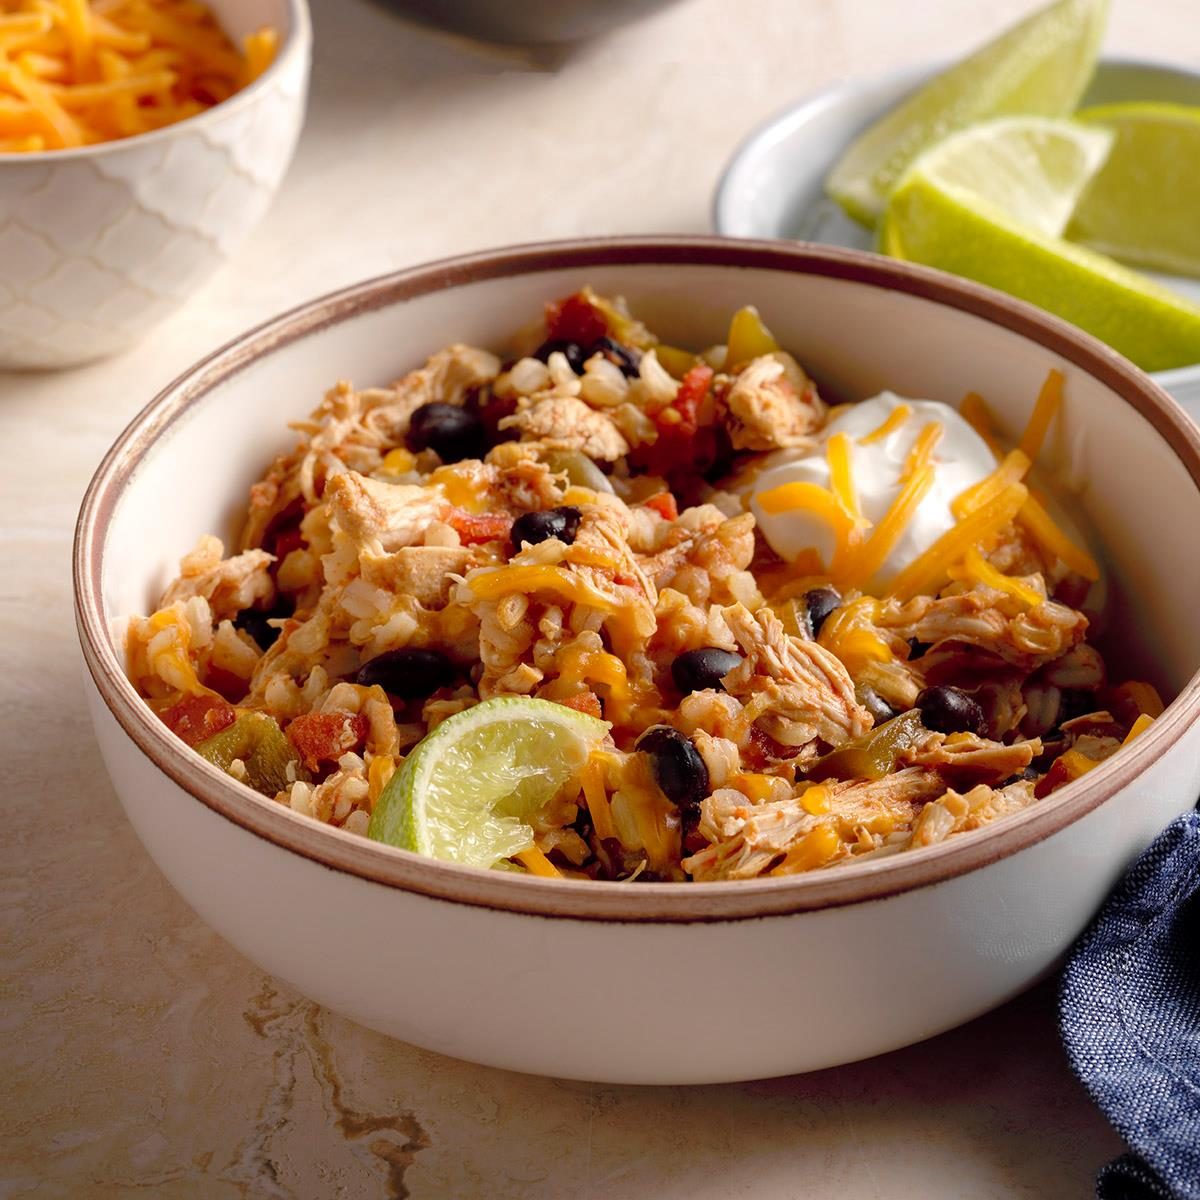 https://www.tasteofhome.com/wp-content/uploads/2018/01/Spicy-Chicken-and-Rice_EXPS_SSCBZ18_132100_B09_27_4b-2.jpg?fit=700%2C1024